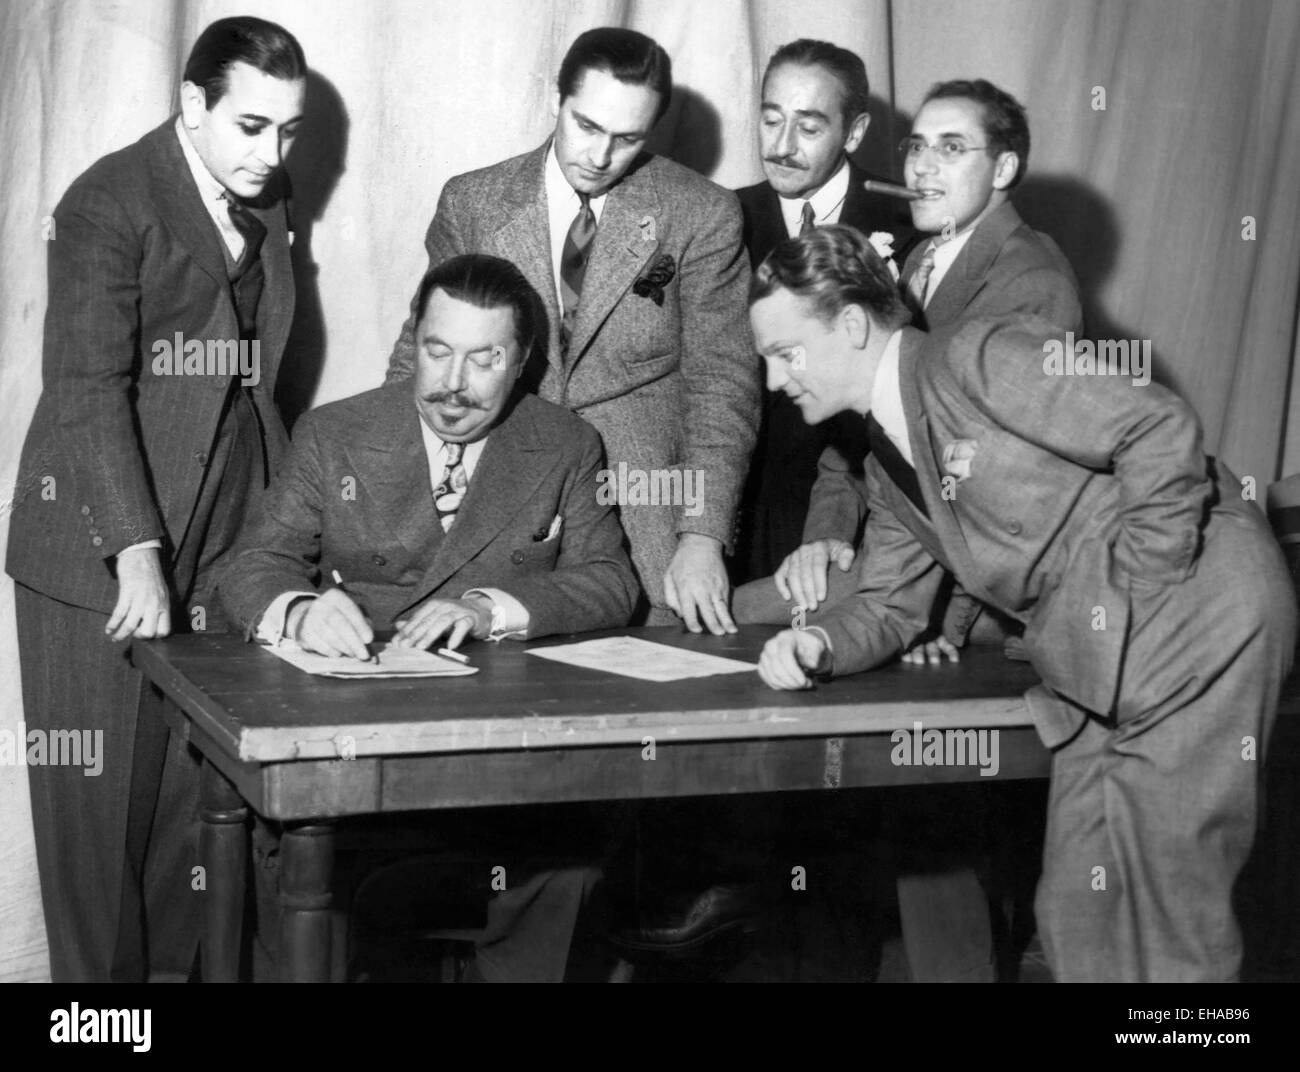 Founding Members of Screen Actors Guild, George Raft, Warner Oland, Fredric March, Adolph Menjou, James Cagney, Groucho Marx, El Capitan Theater, Los Angeles, October 9, 1933 Stock Photo